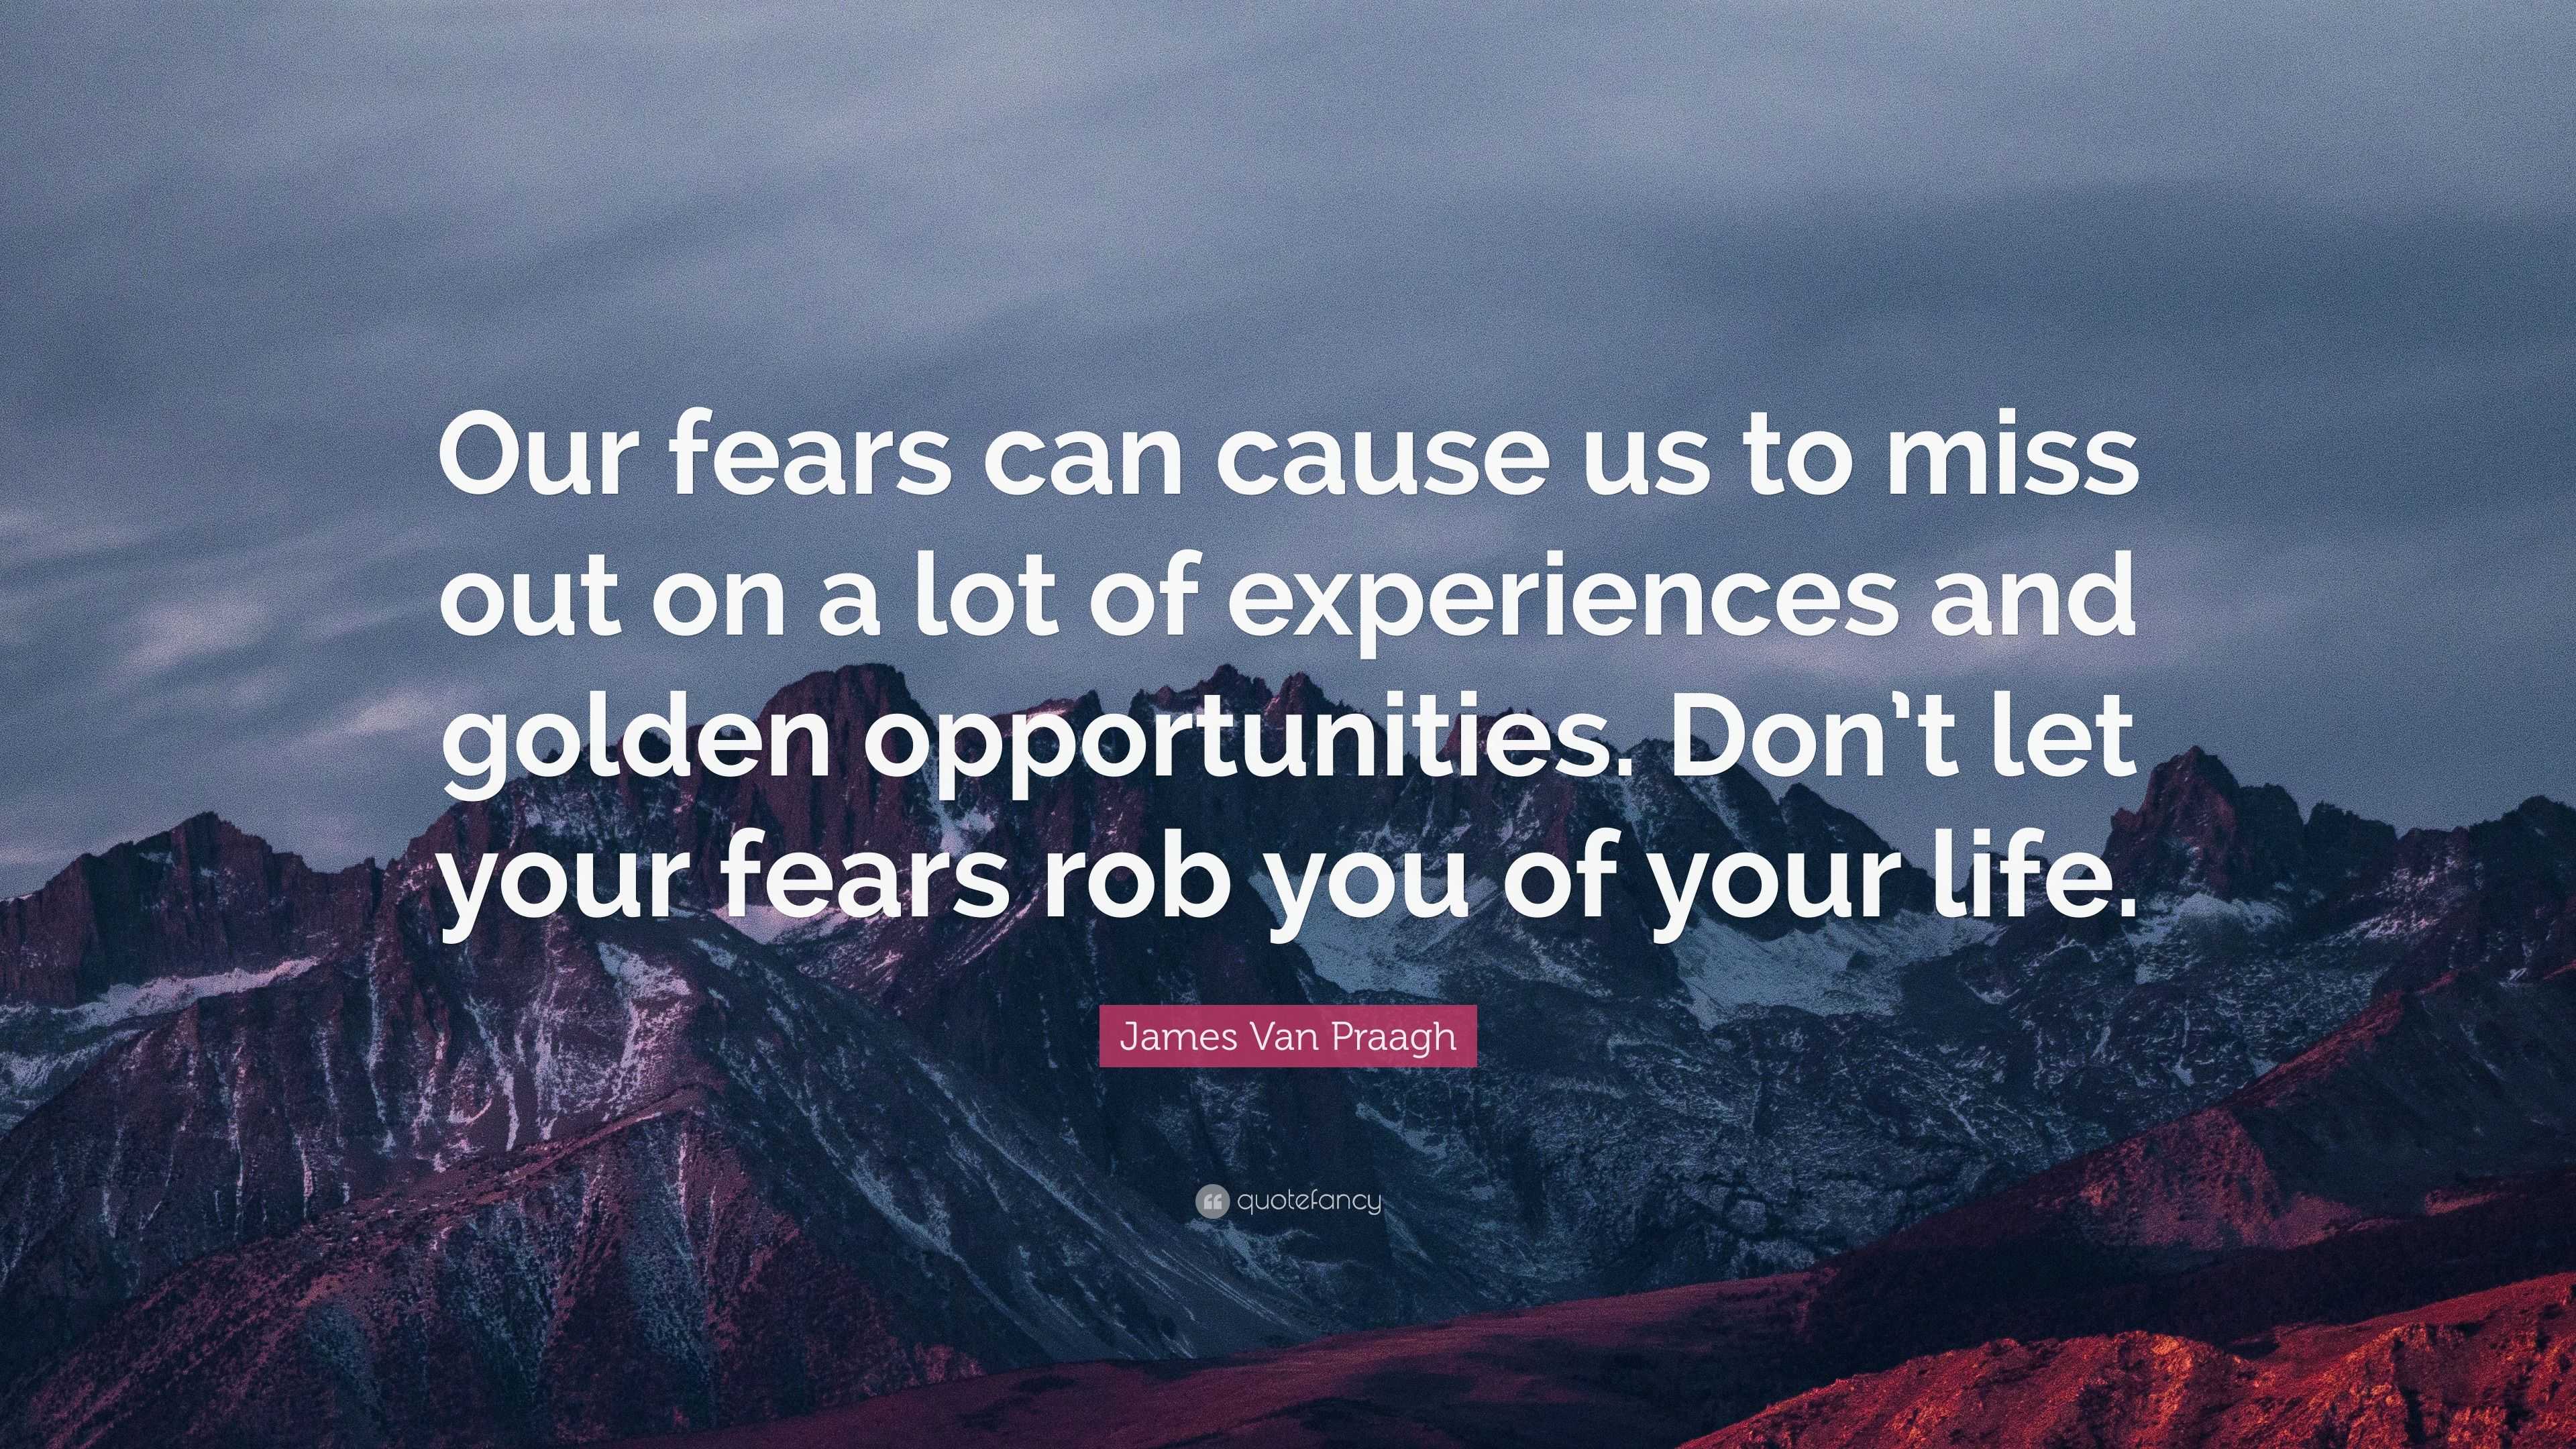 James Van Praagh Quote Our Fears Can Cause Us To Miss Out On A Lot Of Experiences And Golden Opportunities Don T Let Your Fears Rob You Of You